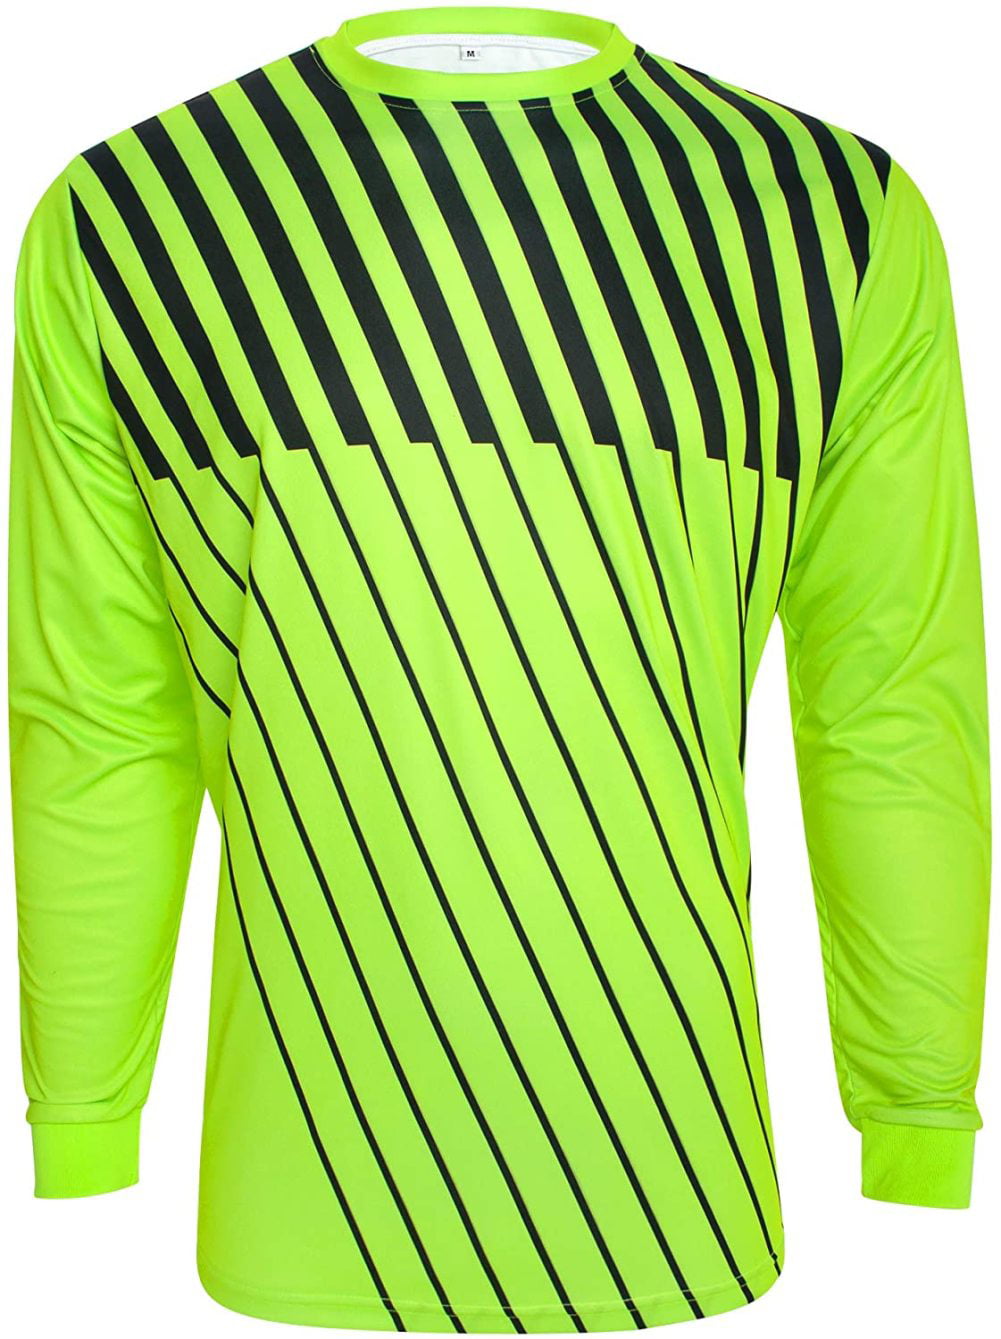 TOPTIE Long Sleeve Soccer Goalkeeper Jersey Personalized with Name and Number 